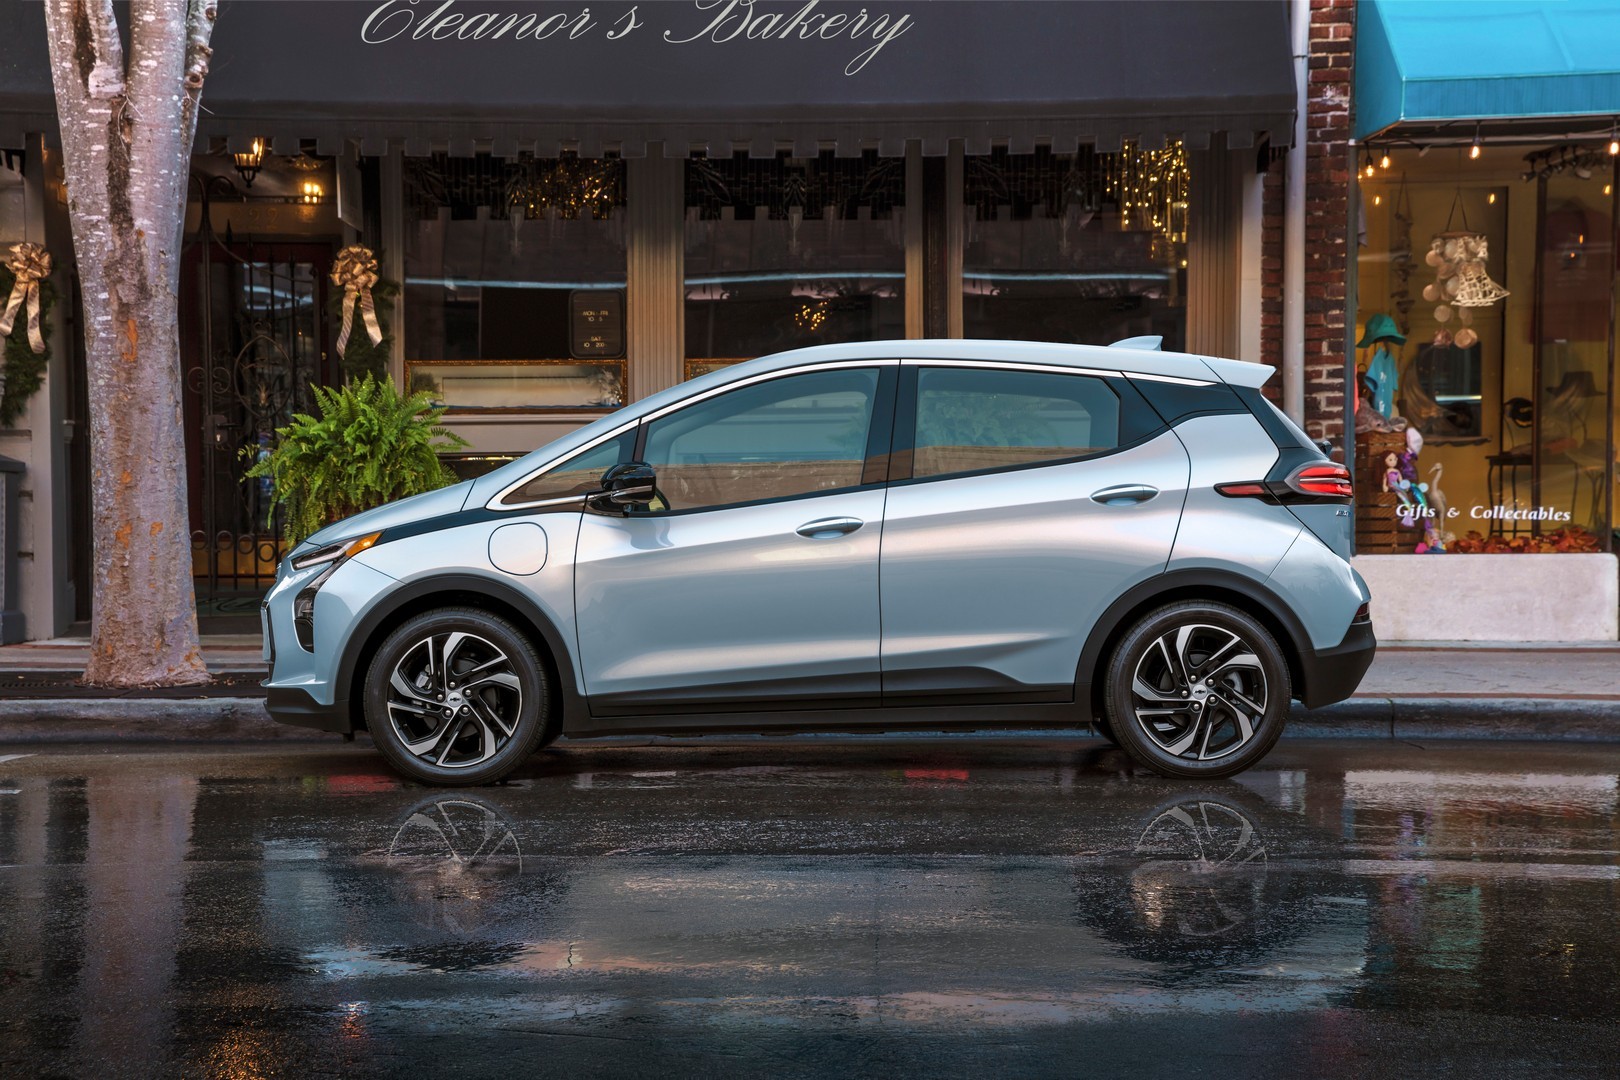 GM Publishes 2023 Chevrolet Bolt EV Order Guide, Illuminated Charge